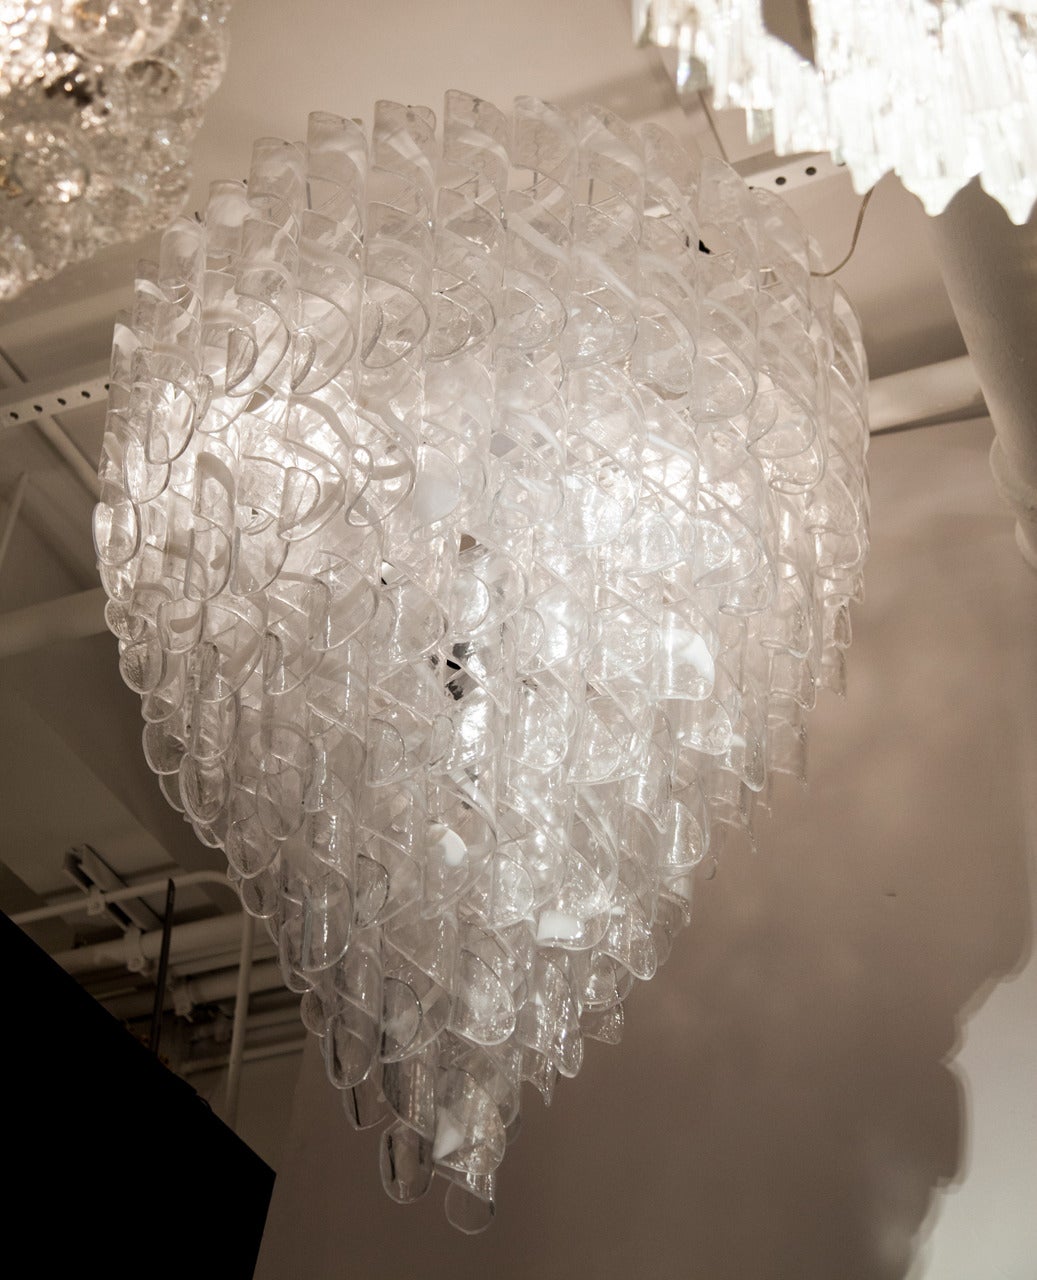 Individually sculpted clear and white handblown Murano glass spirals make up this elegant chandelier. Each handmade glass piece is partly covered by an opaque white line over transparent glass. The white color is very pure when it is lit. Chromed